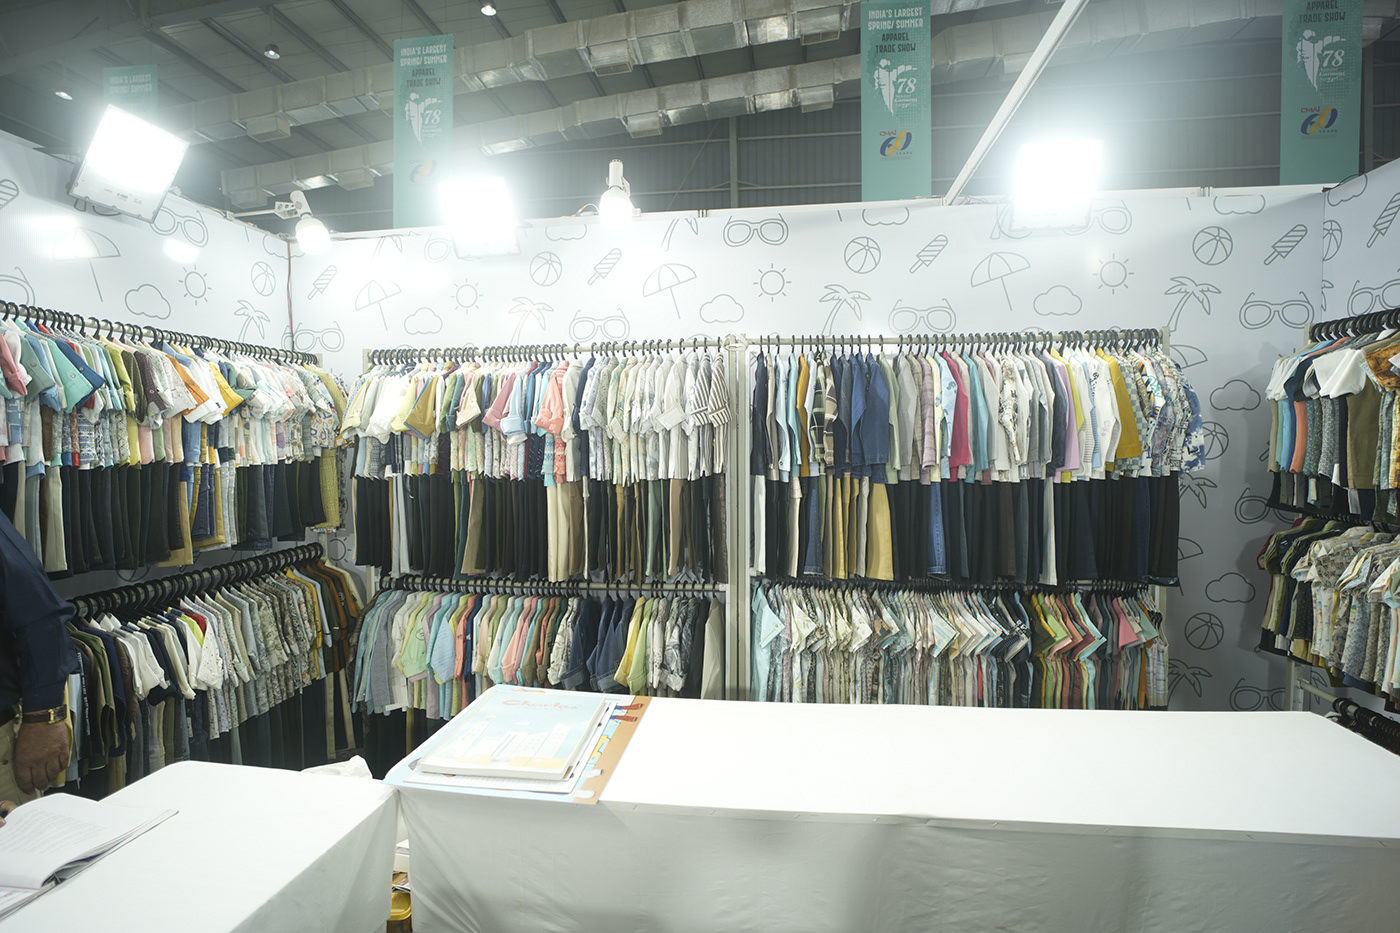 cmai exhibition Garment fair exhibition stand booth expo Render 3D 3ds max vray